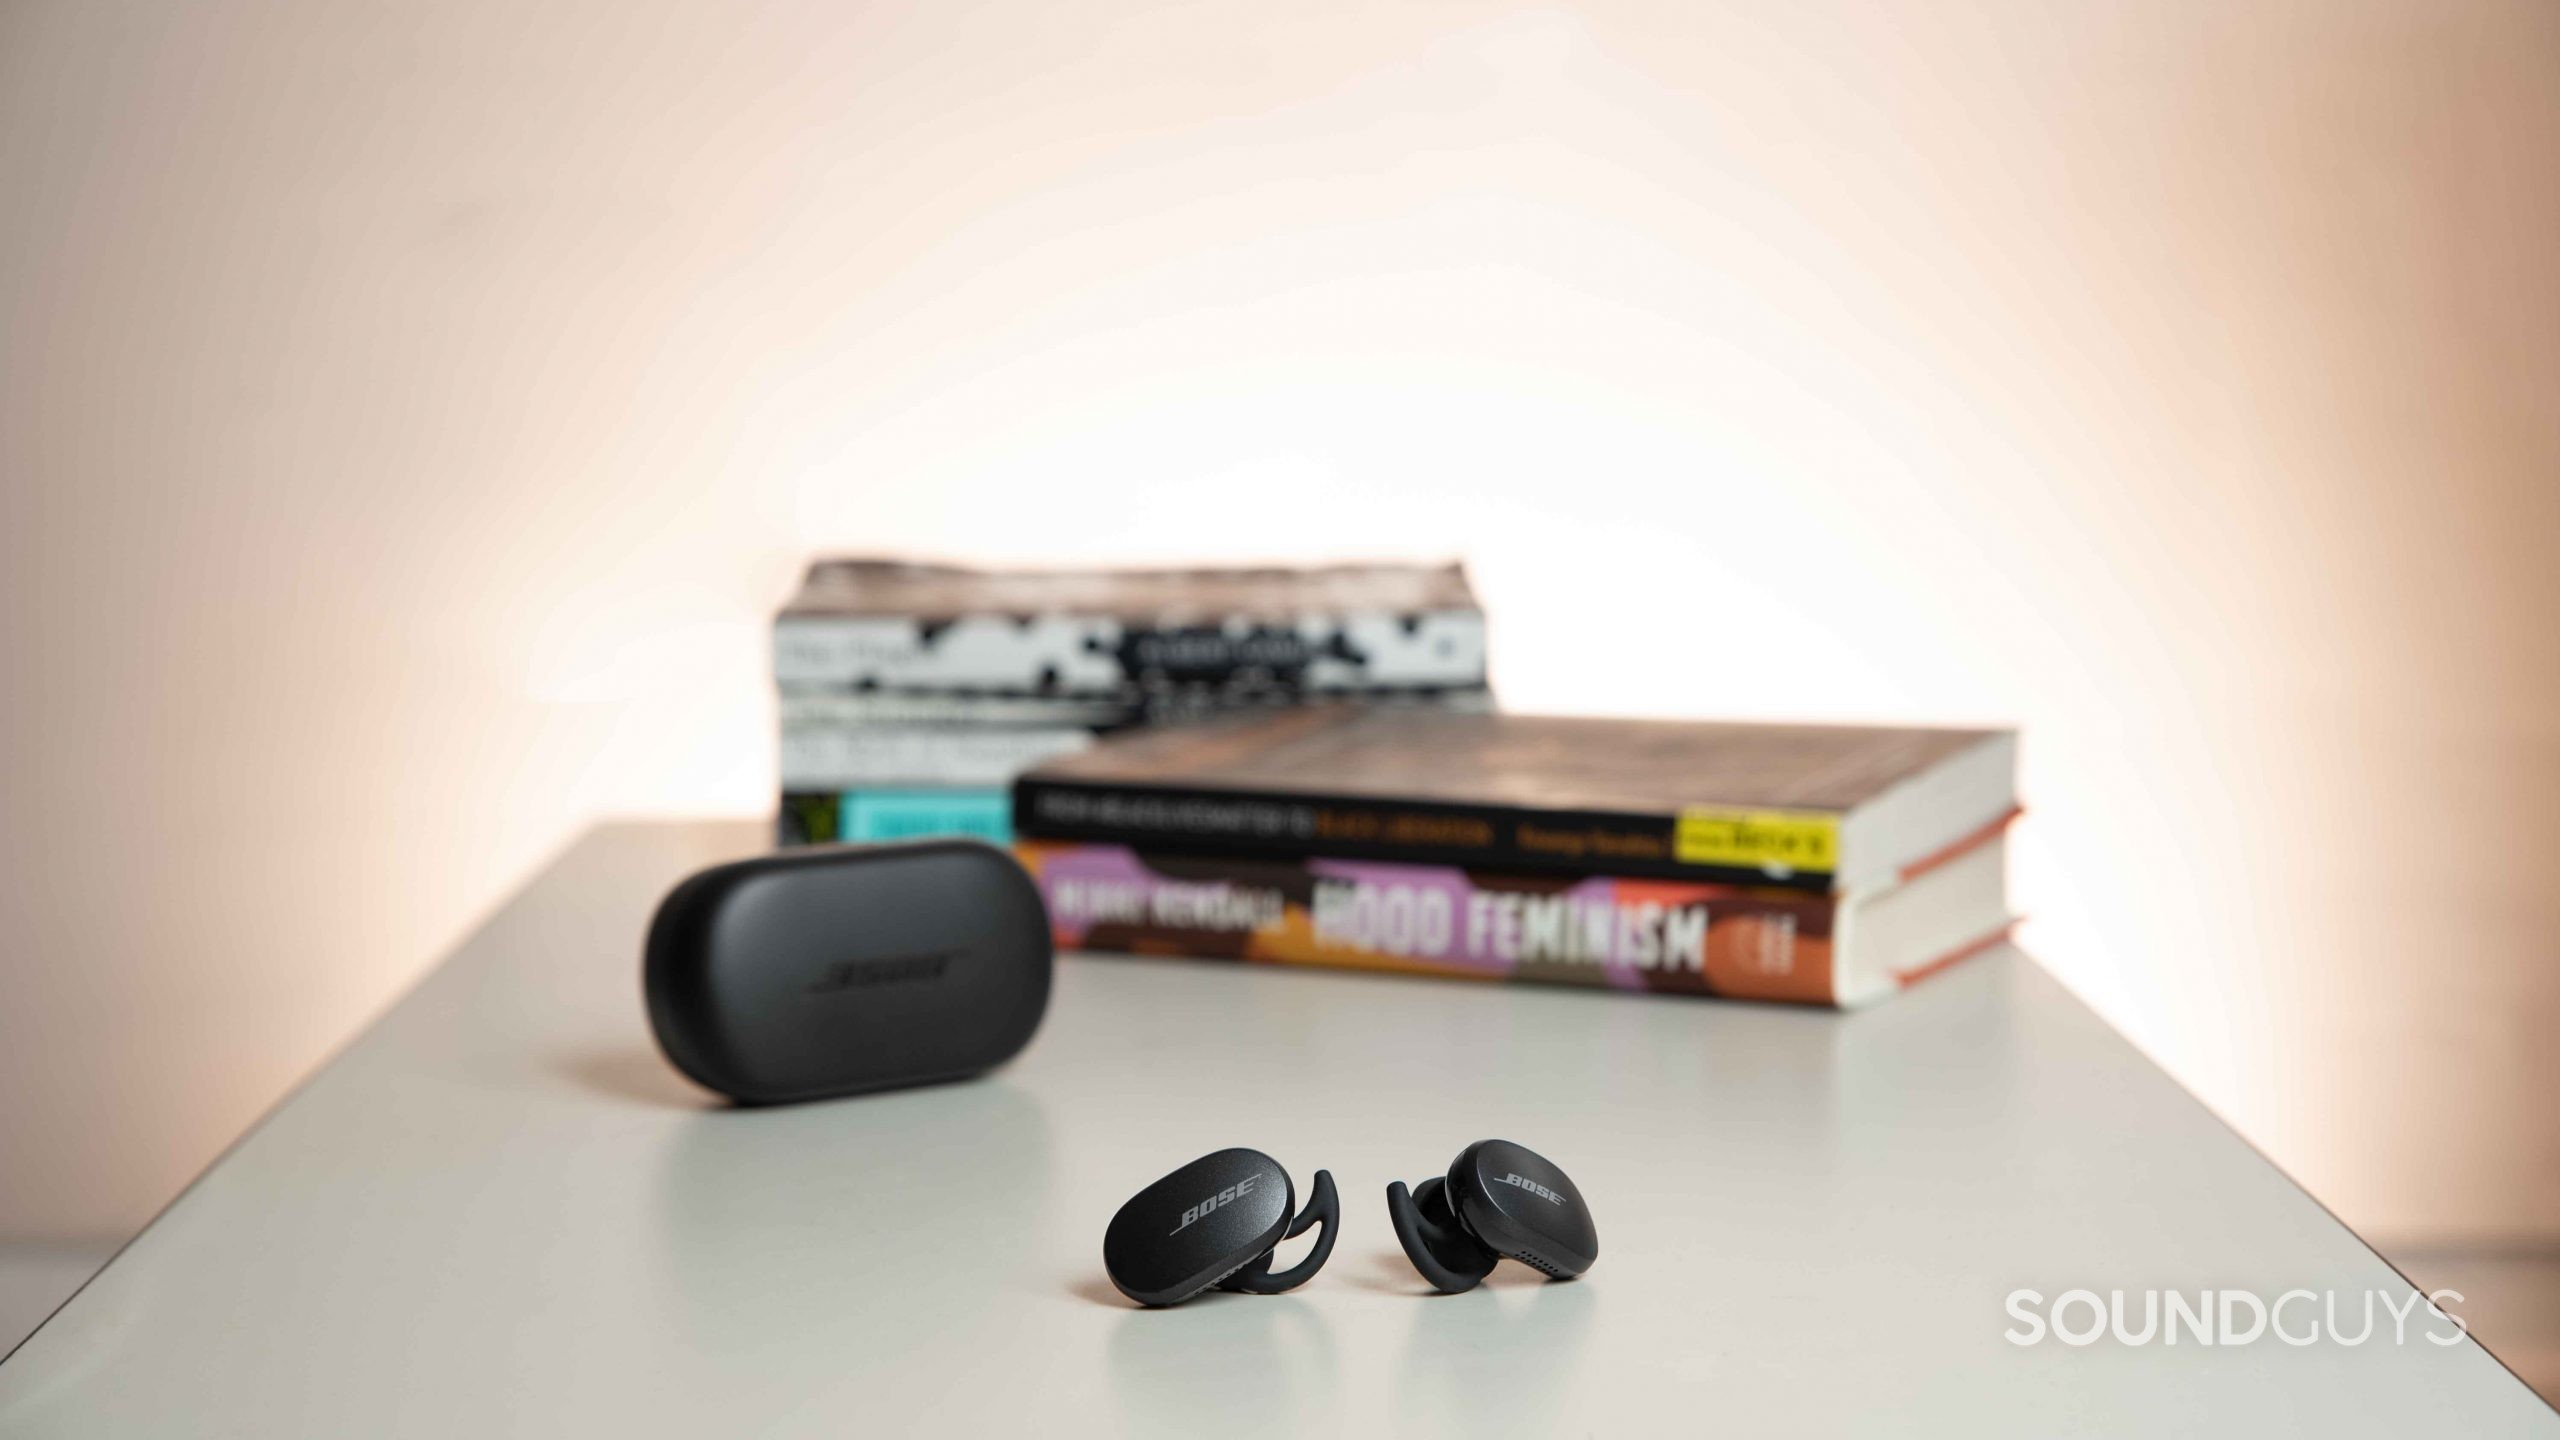 The Bose QuietComfort Earbuds noise canceling true wireless earbuds rest outside of the charging case on a table and in front of a stack of books.